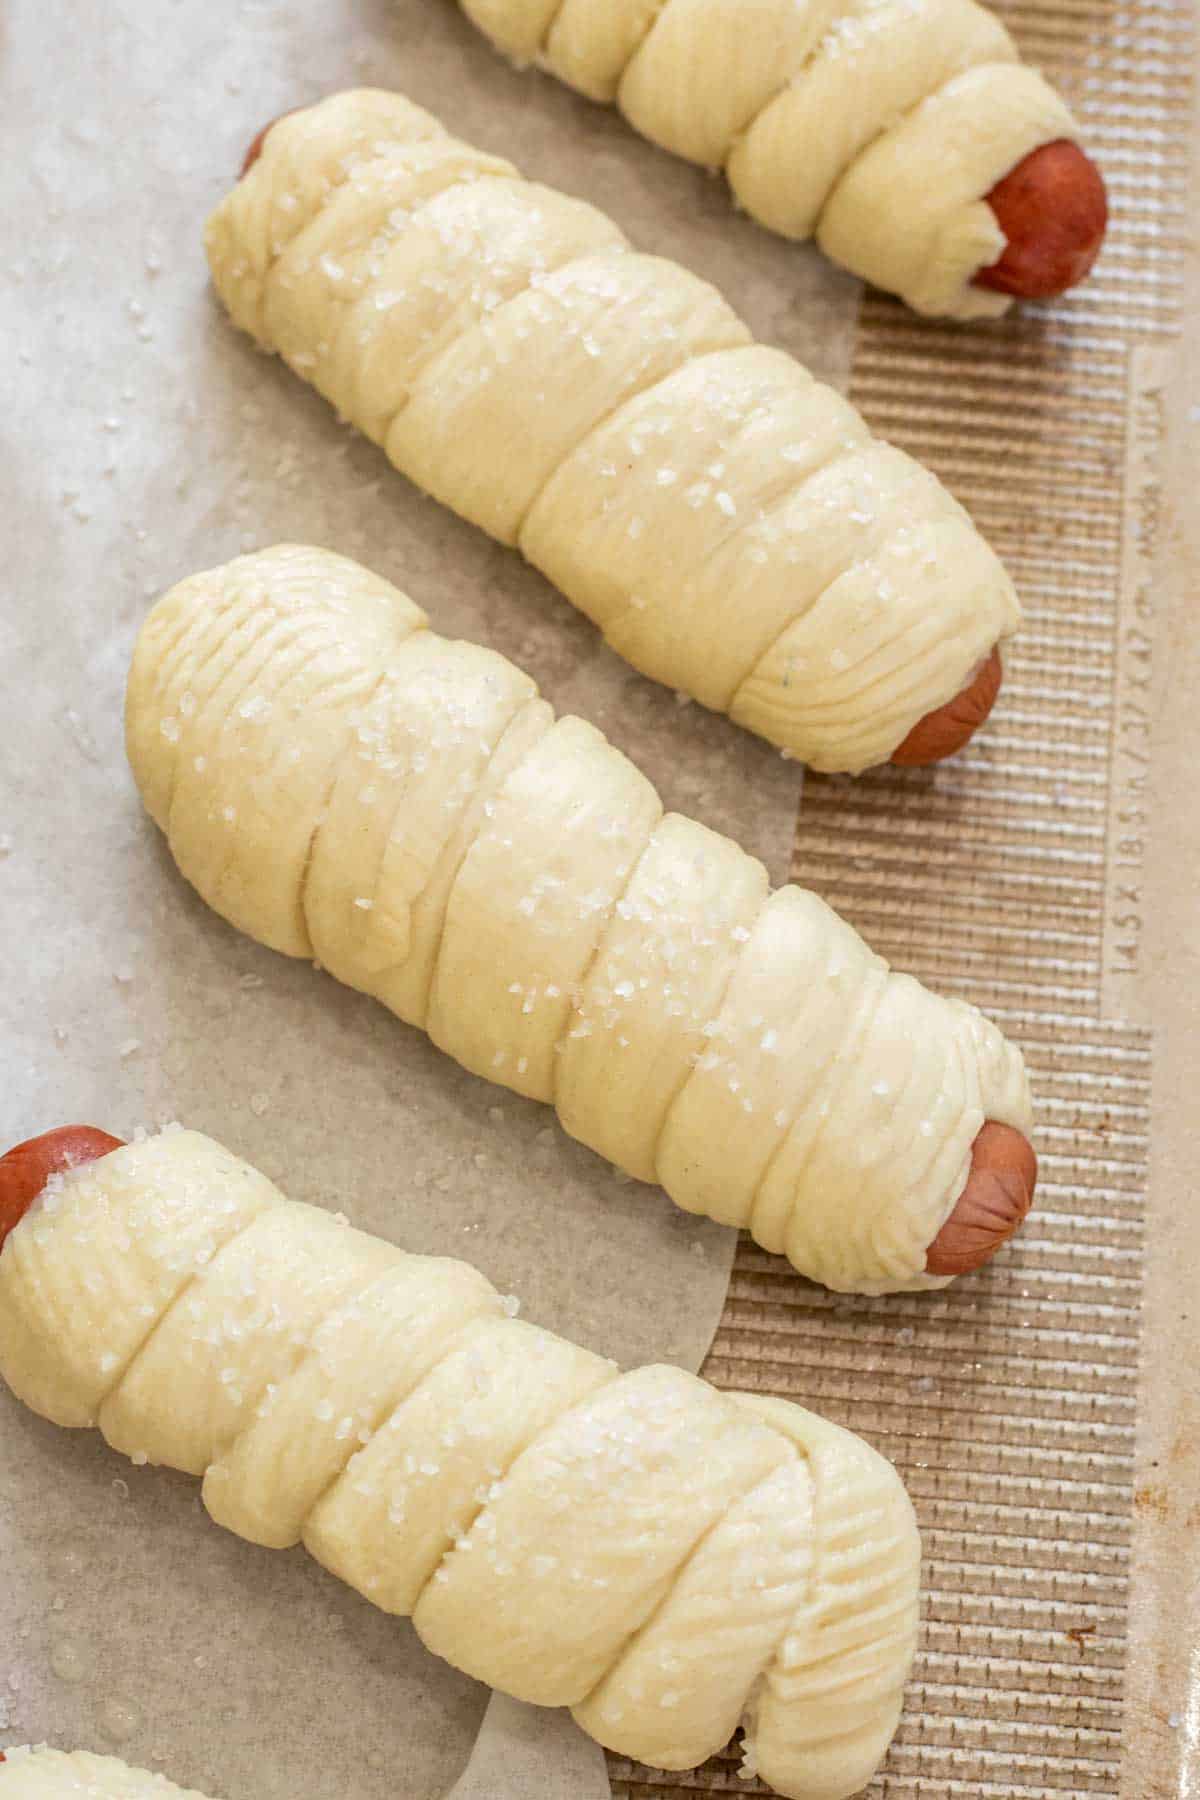 Juicy hot dogs wrapped in a homemade pretzel dough and baked to perfection. 